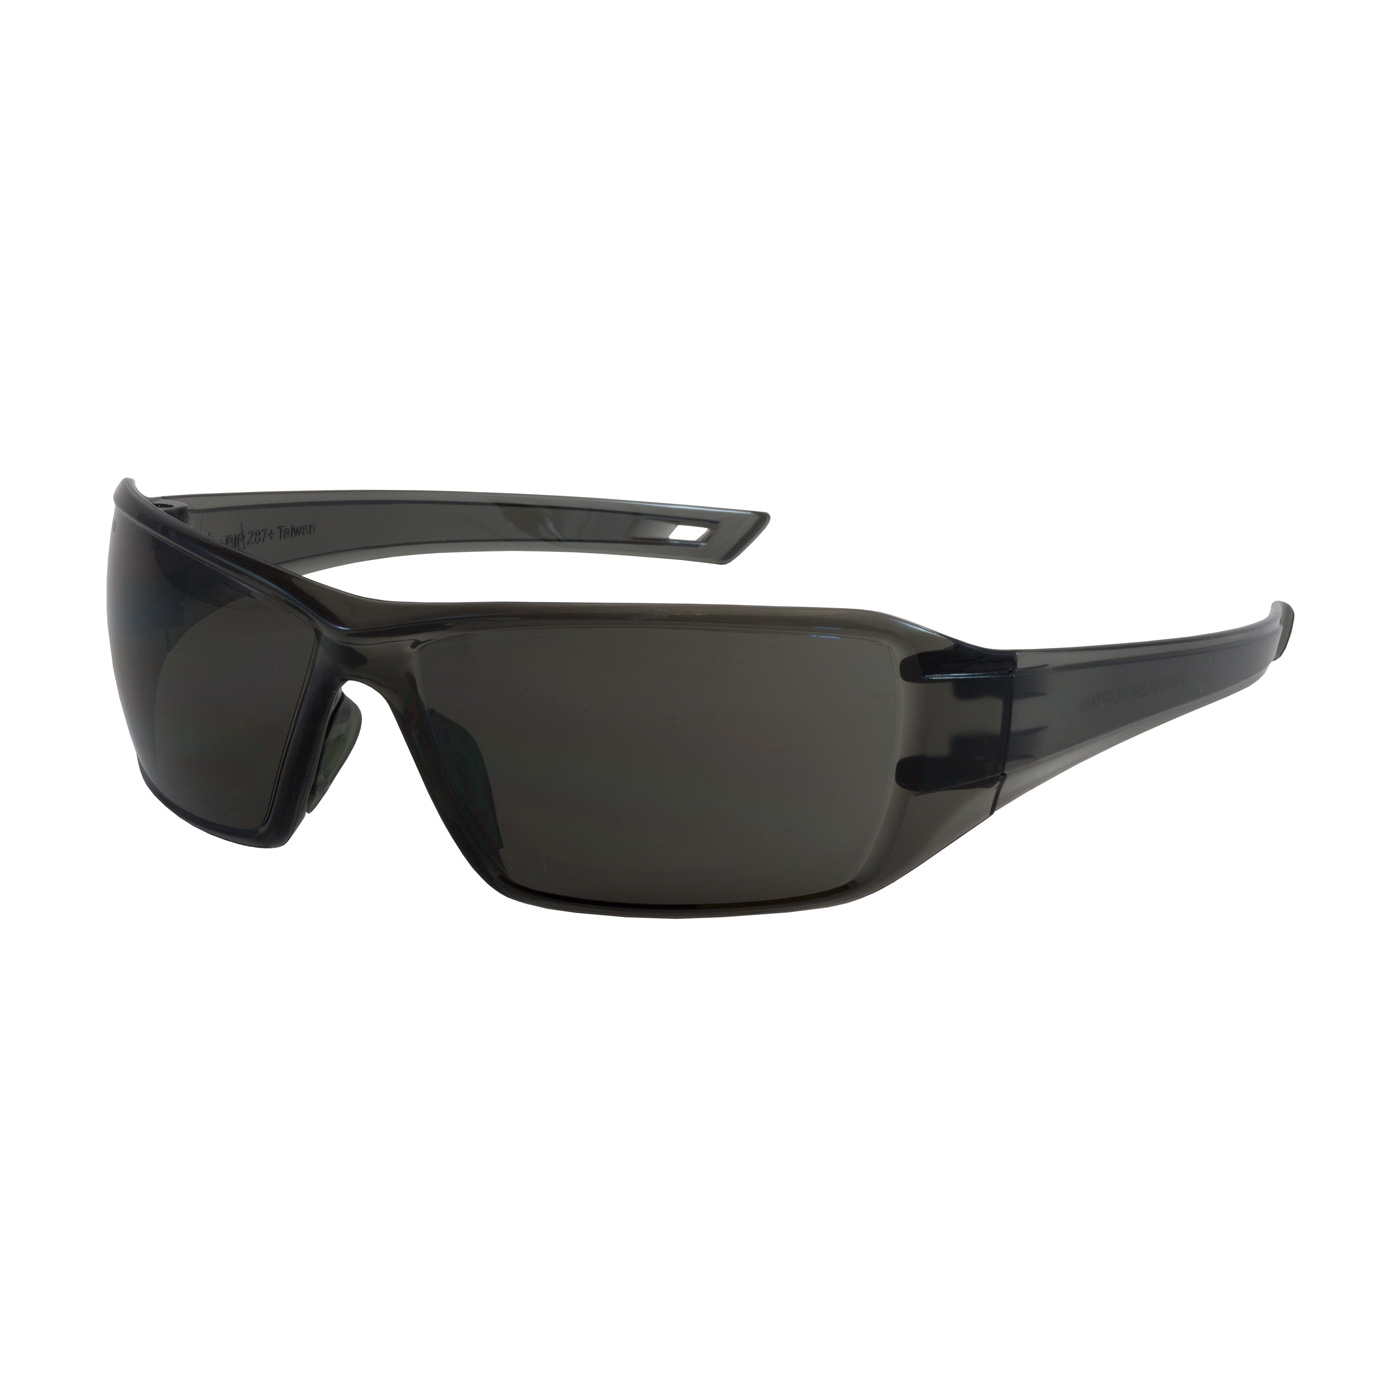 PIP 250-46-0521 Captain Rimless Safety Glasses with Gray Temple, Gray Lens and Anti-Scratch/FogLess 3Sixty Coating PID-250 46 0521